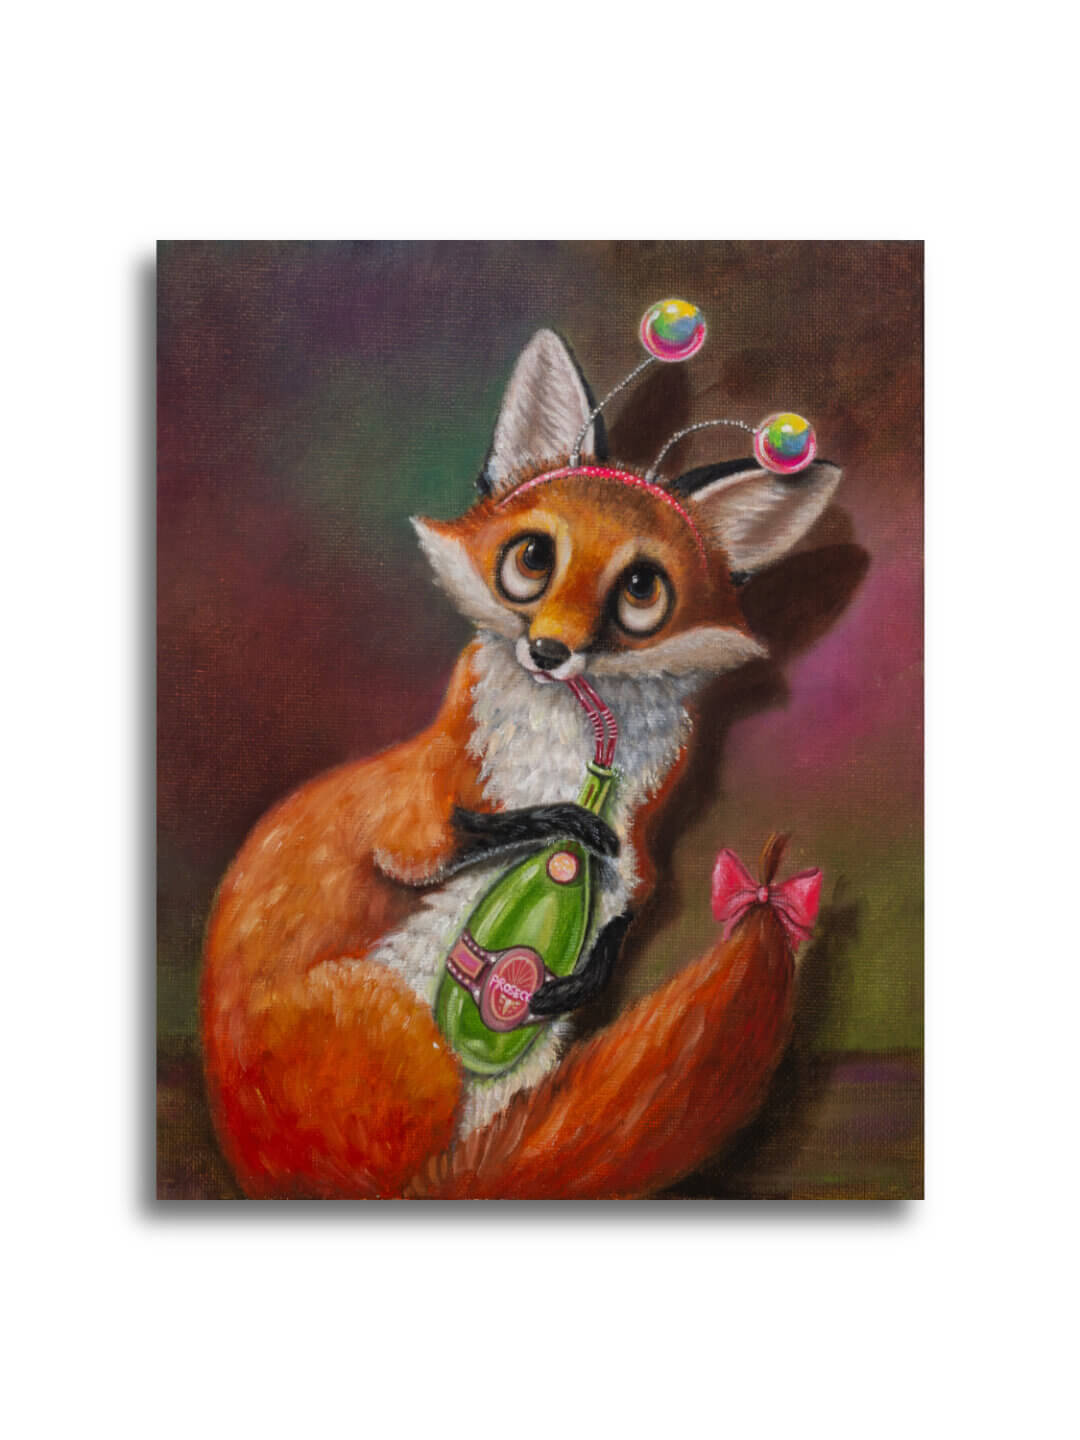 Tiffany Two-Straws! - Part of the 'Soup2Nuts' Collection by Ann Richmond - A painting of a cute Vixen out on the razzle... Framing Available.